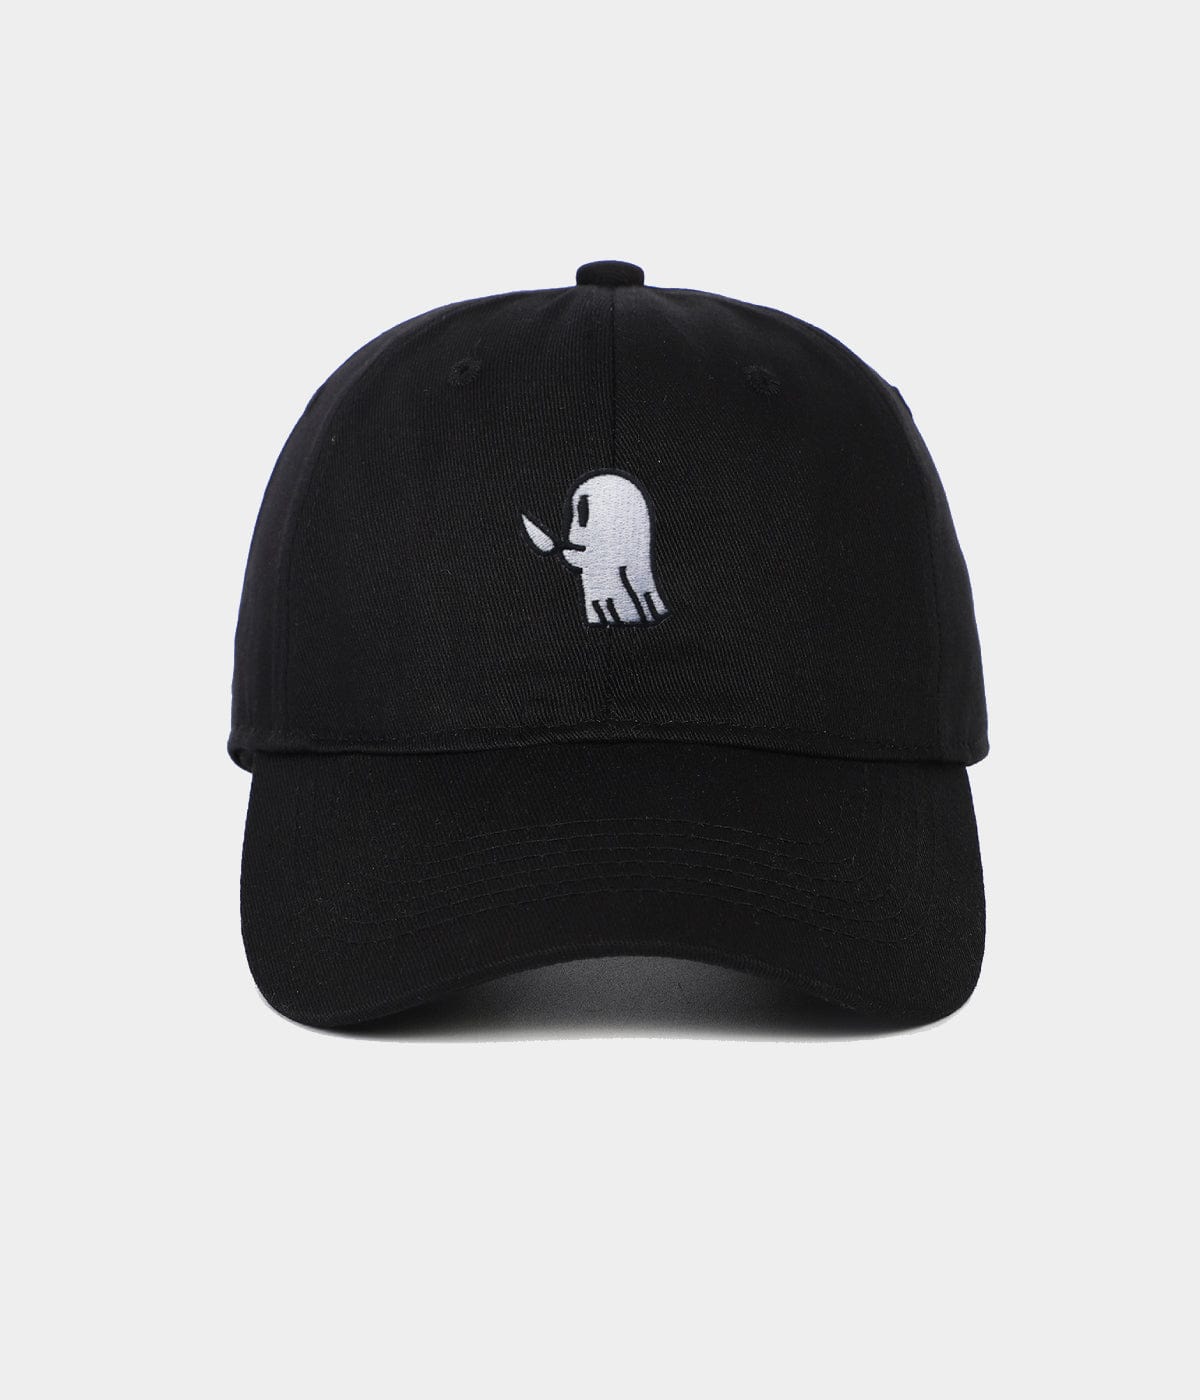 GHOST CAP. | High quality produced by CAPS.